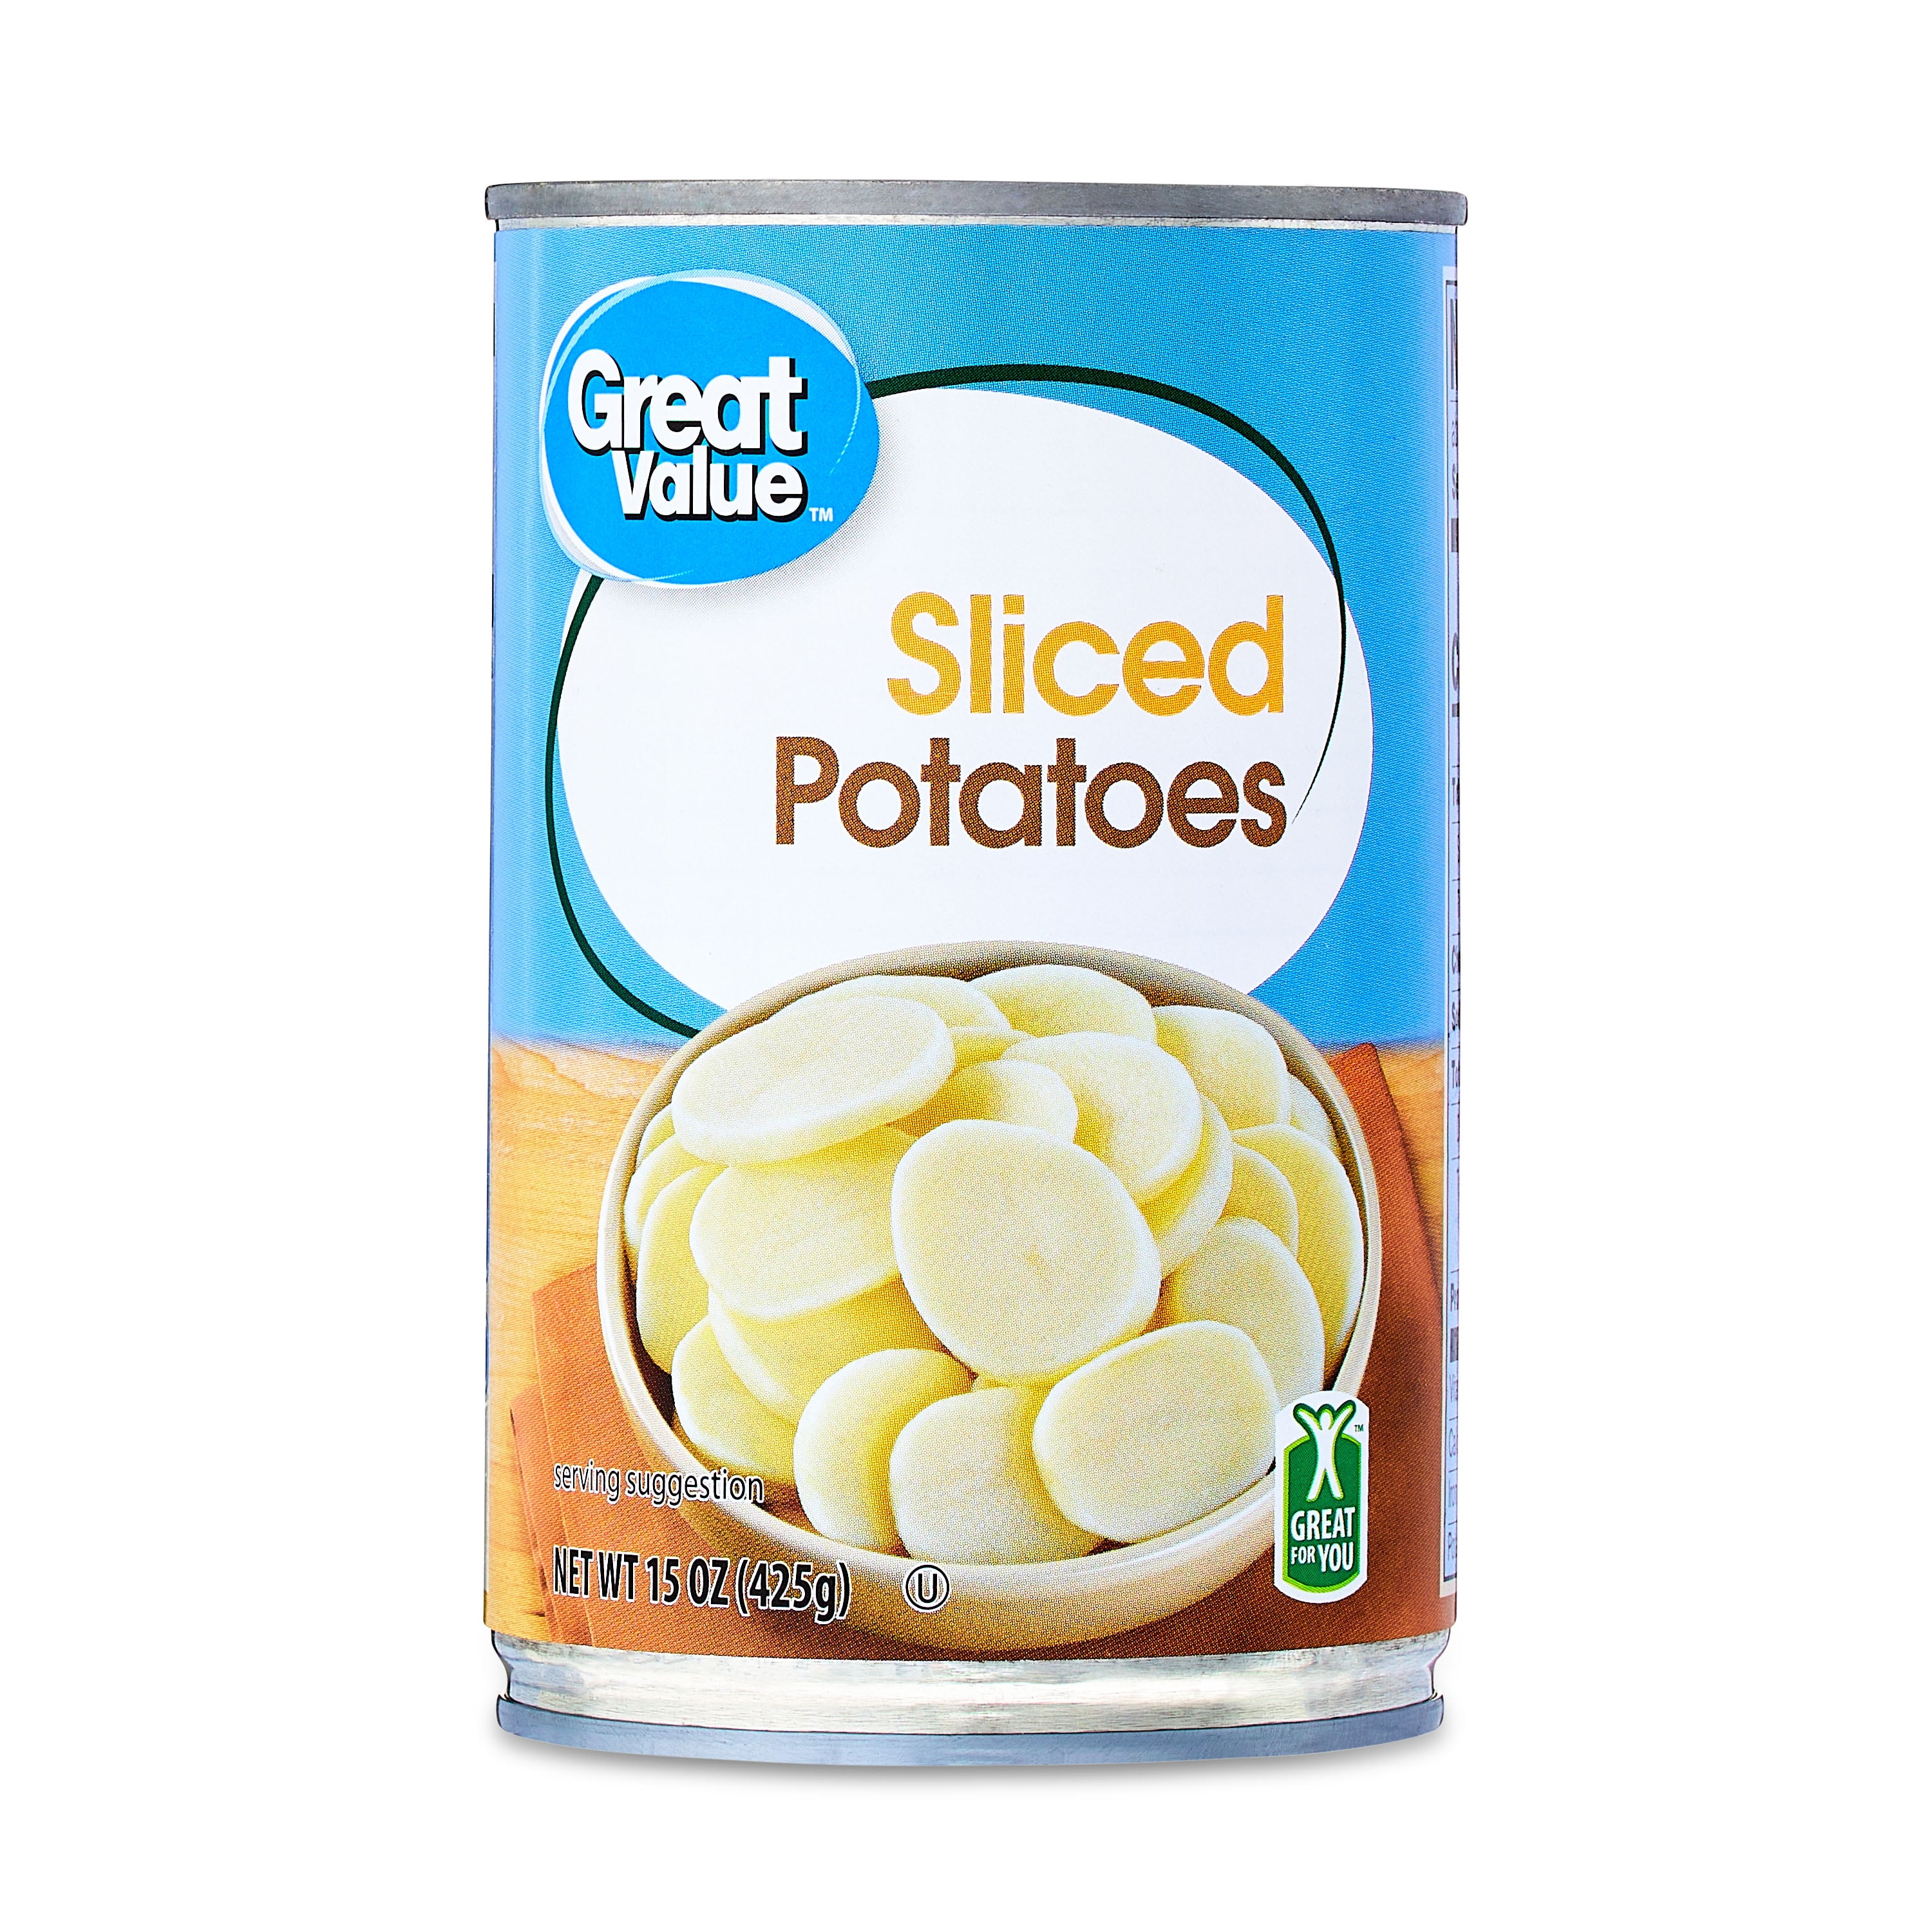 Great Value Sliced Potatoes, Canned Potatoes, 15 oz